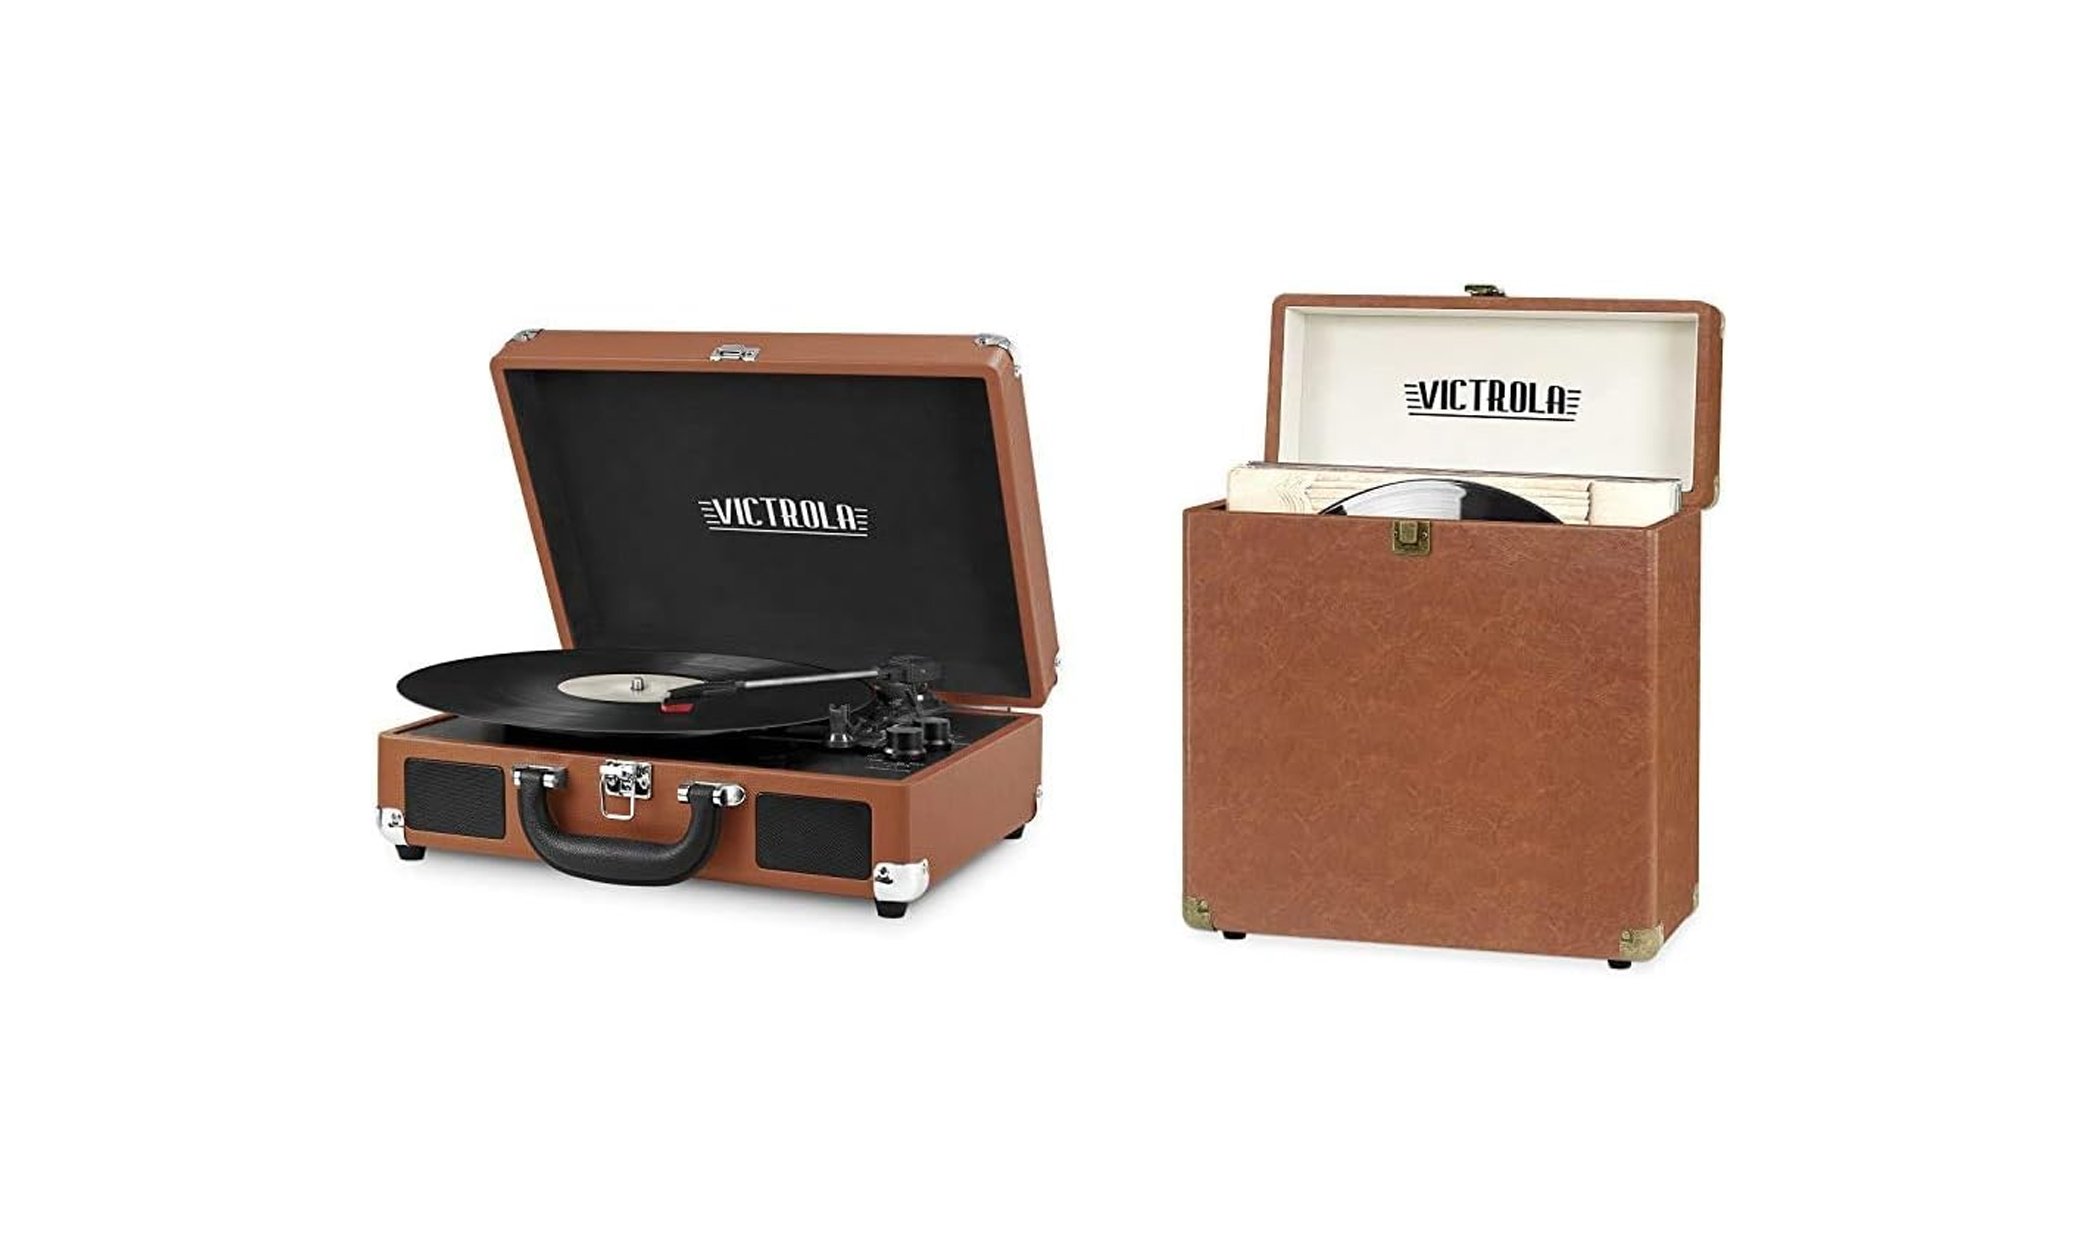 Save 30% on a Victrola Vintage 3-Speed Portable Suitcase Record Player with Built In Speakers!